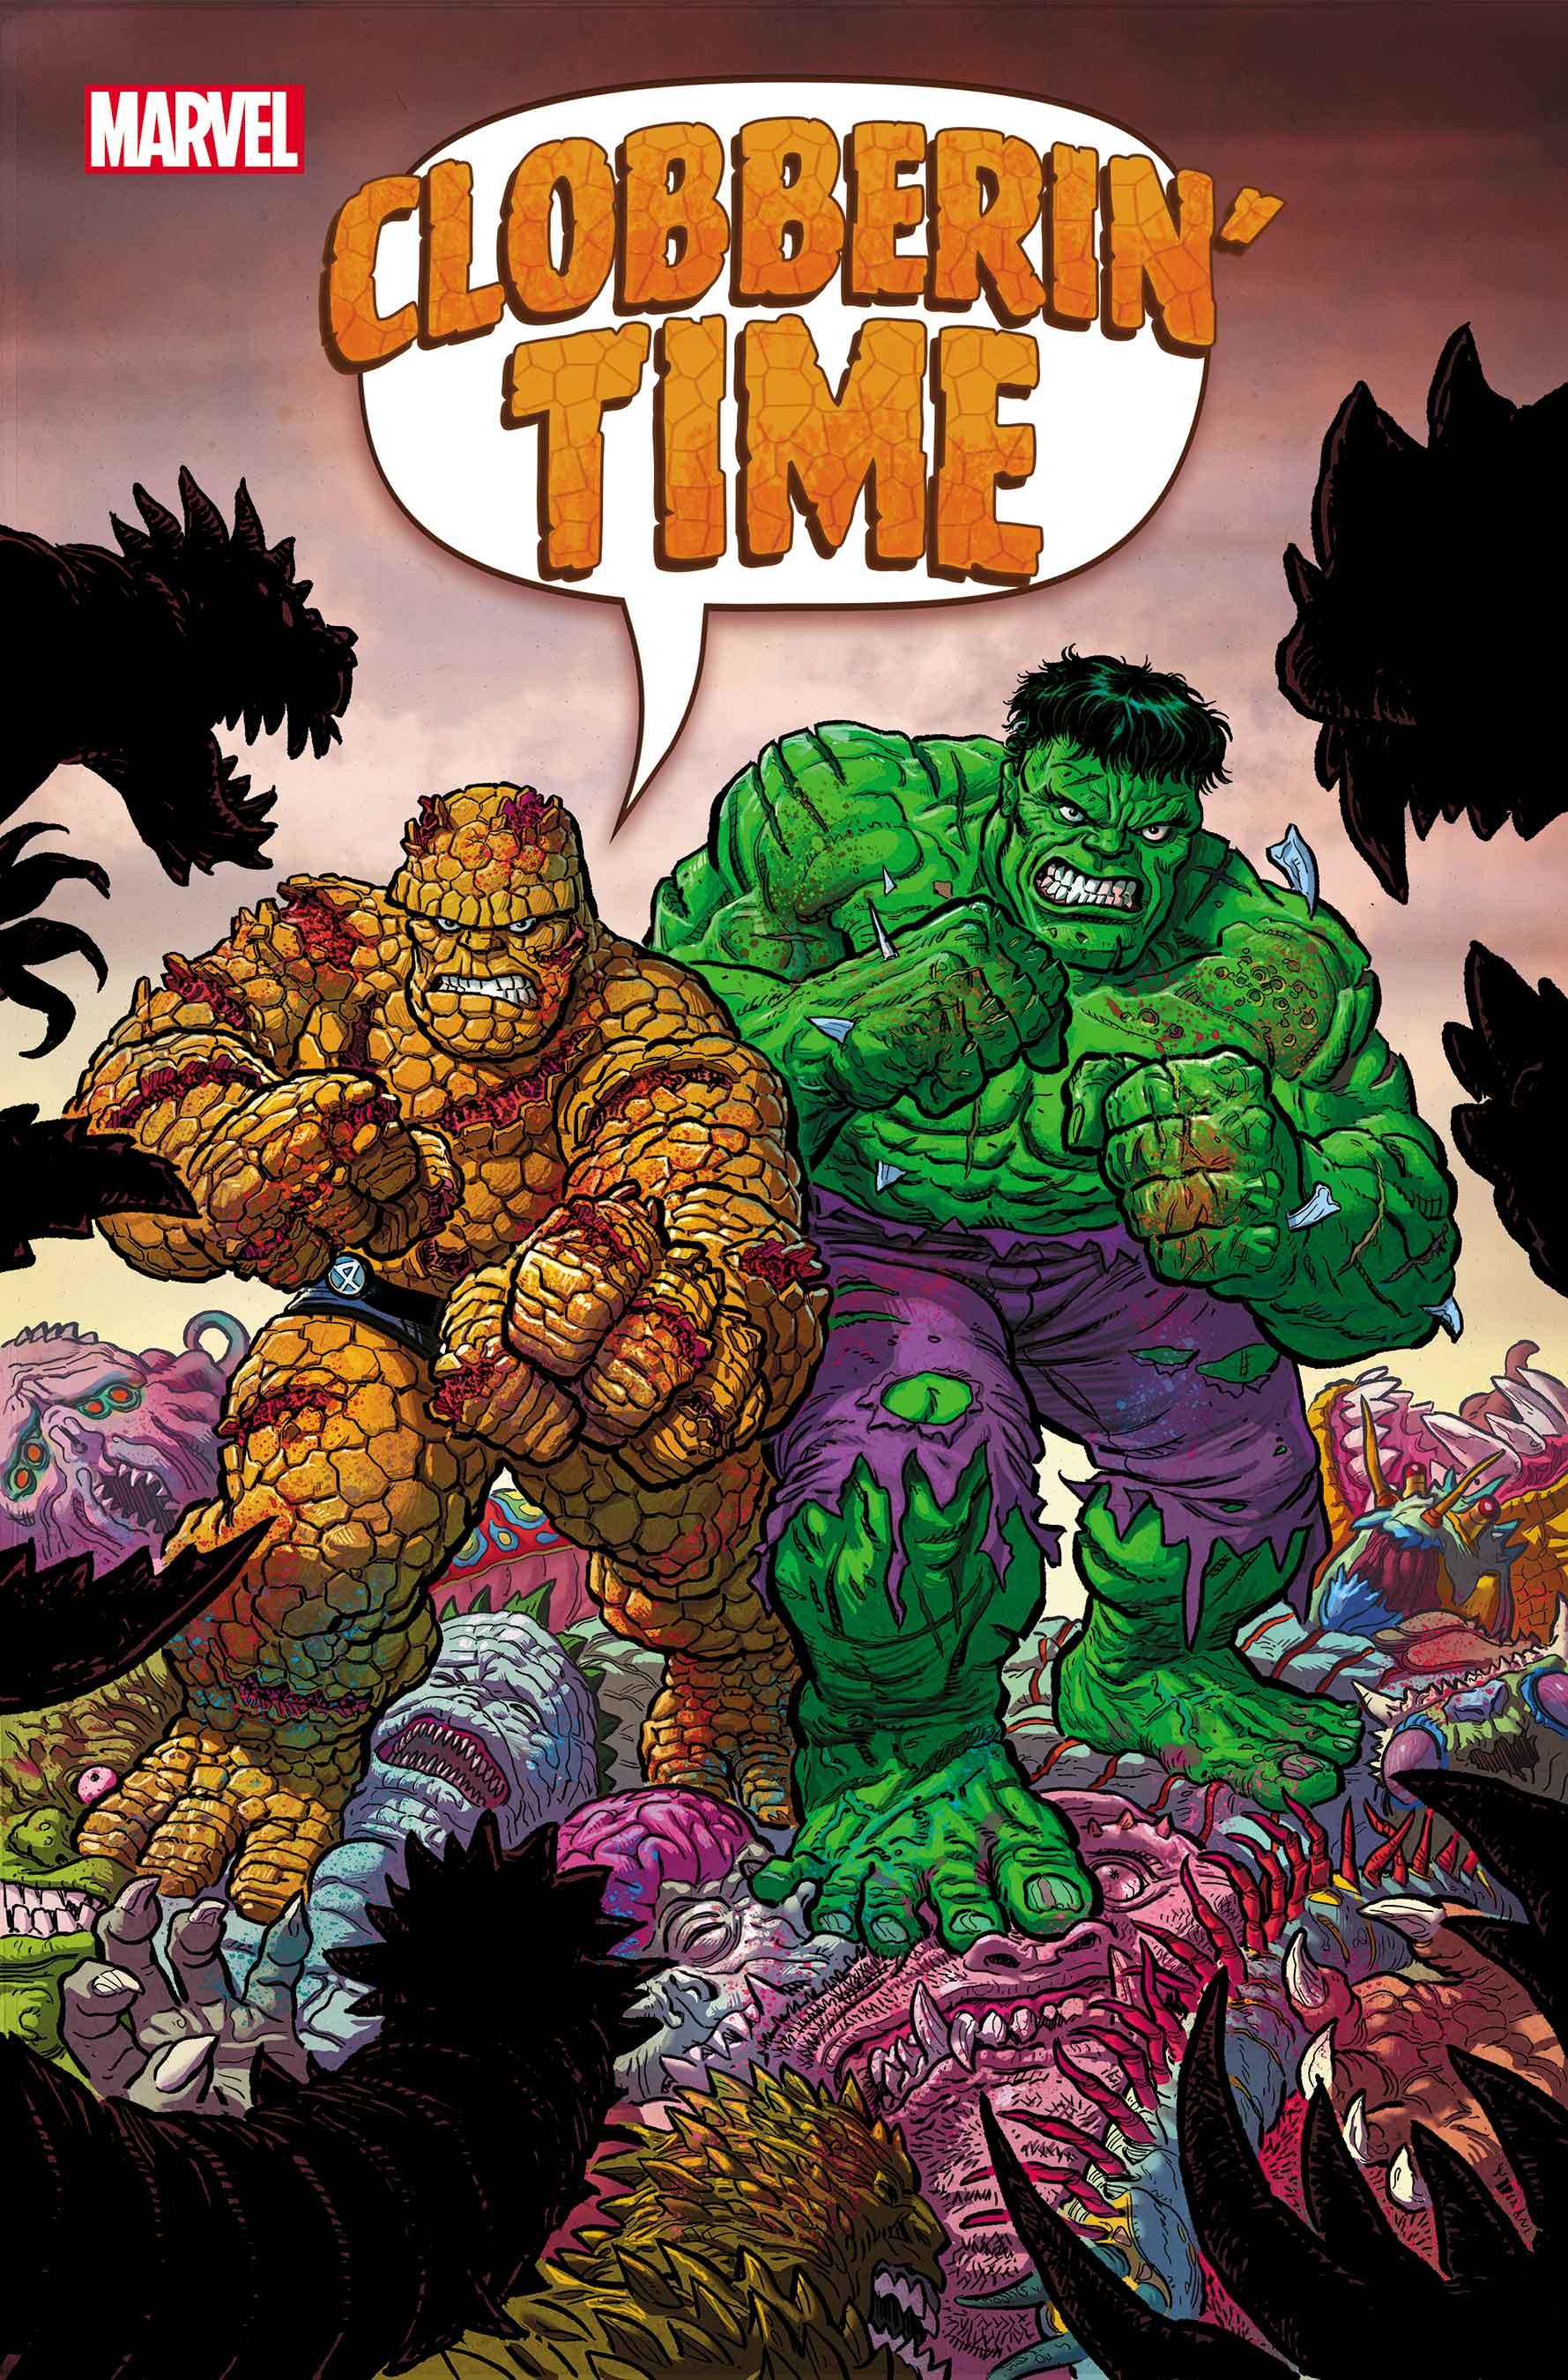 Clobberin Time: Steve Skroce Takes Thing on an Action-Packed Team-Up  Adventure (Exclusive)